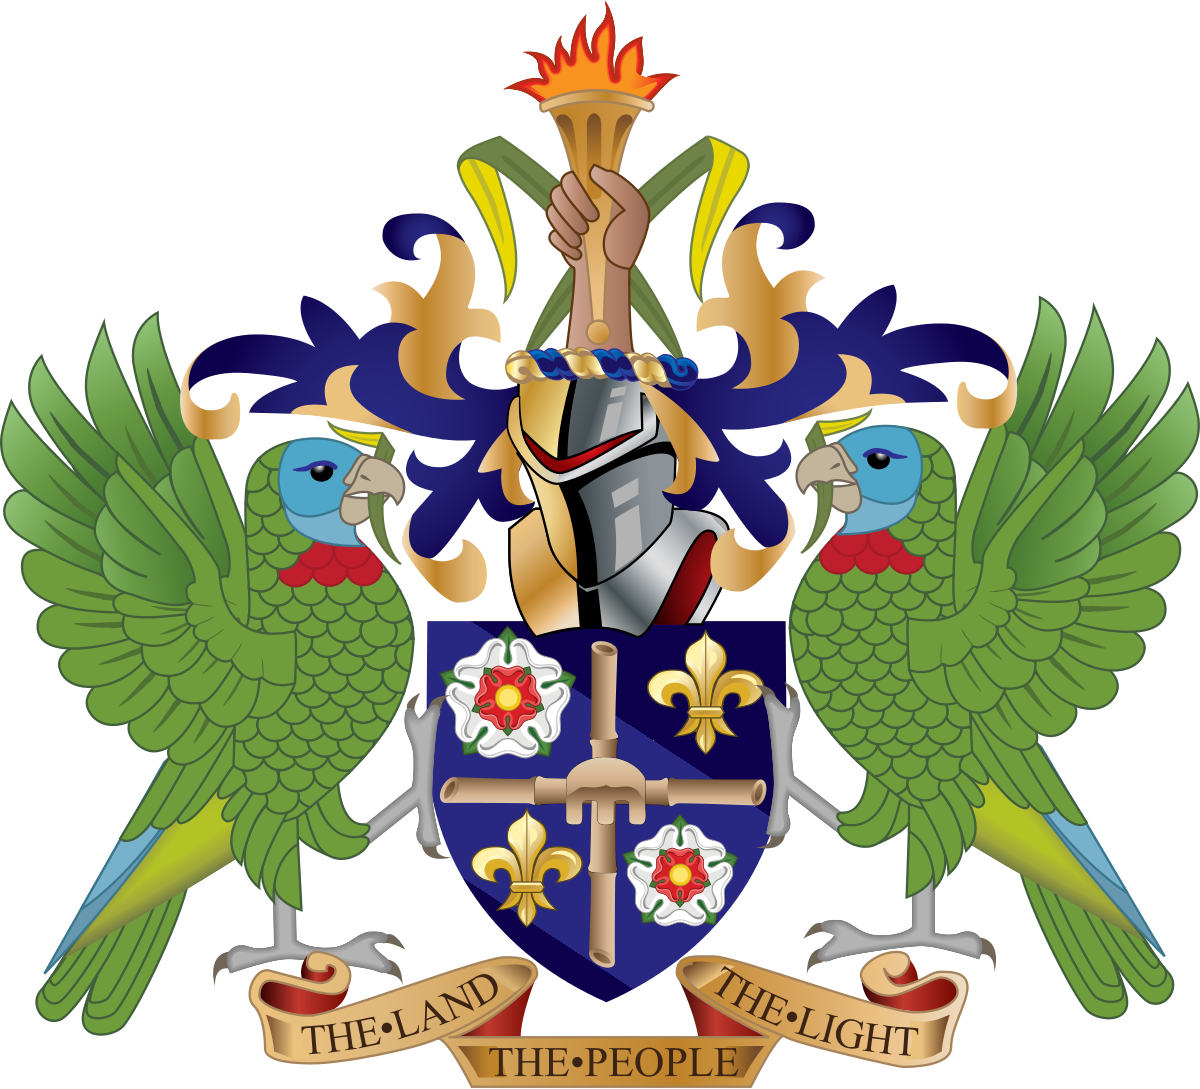 Coat of Arms of Saint Lucia